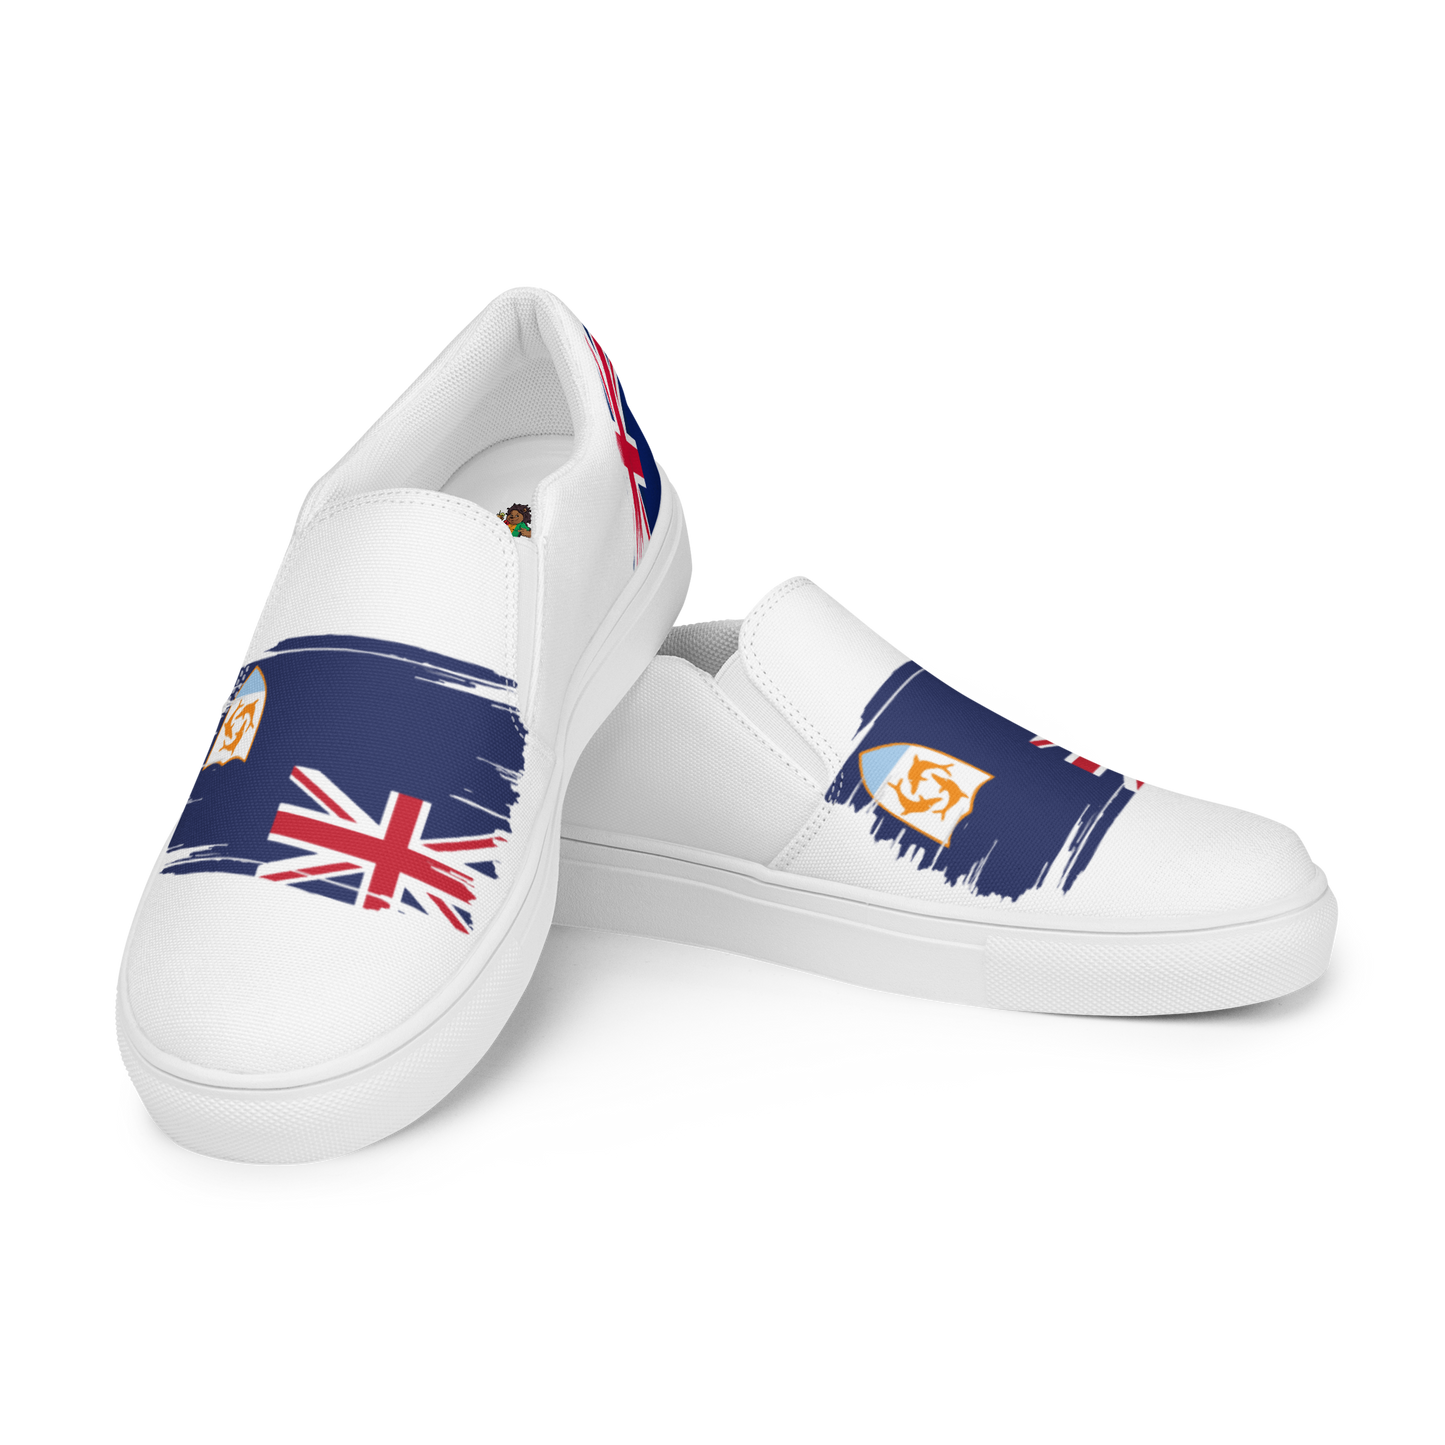 Anguilla Women’s slip-on canvas shoes